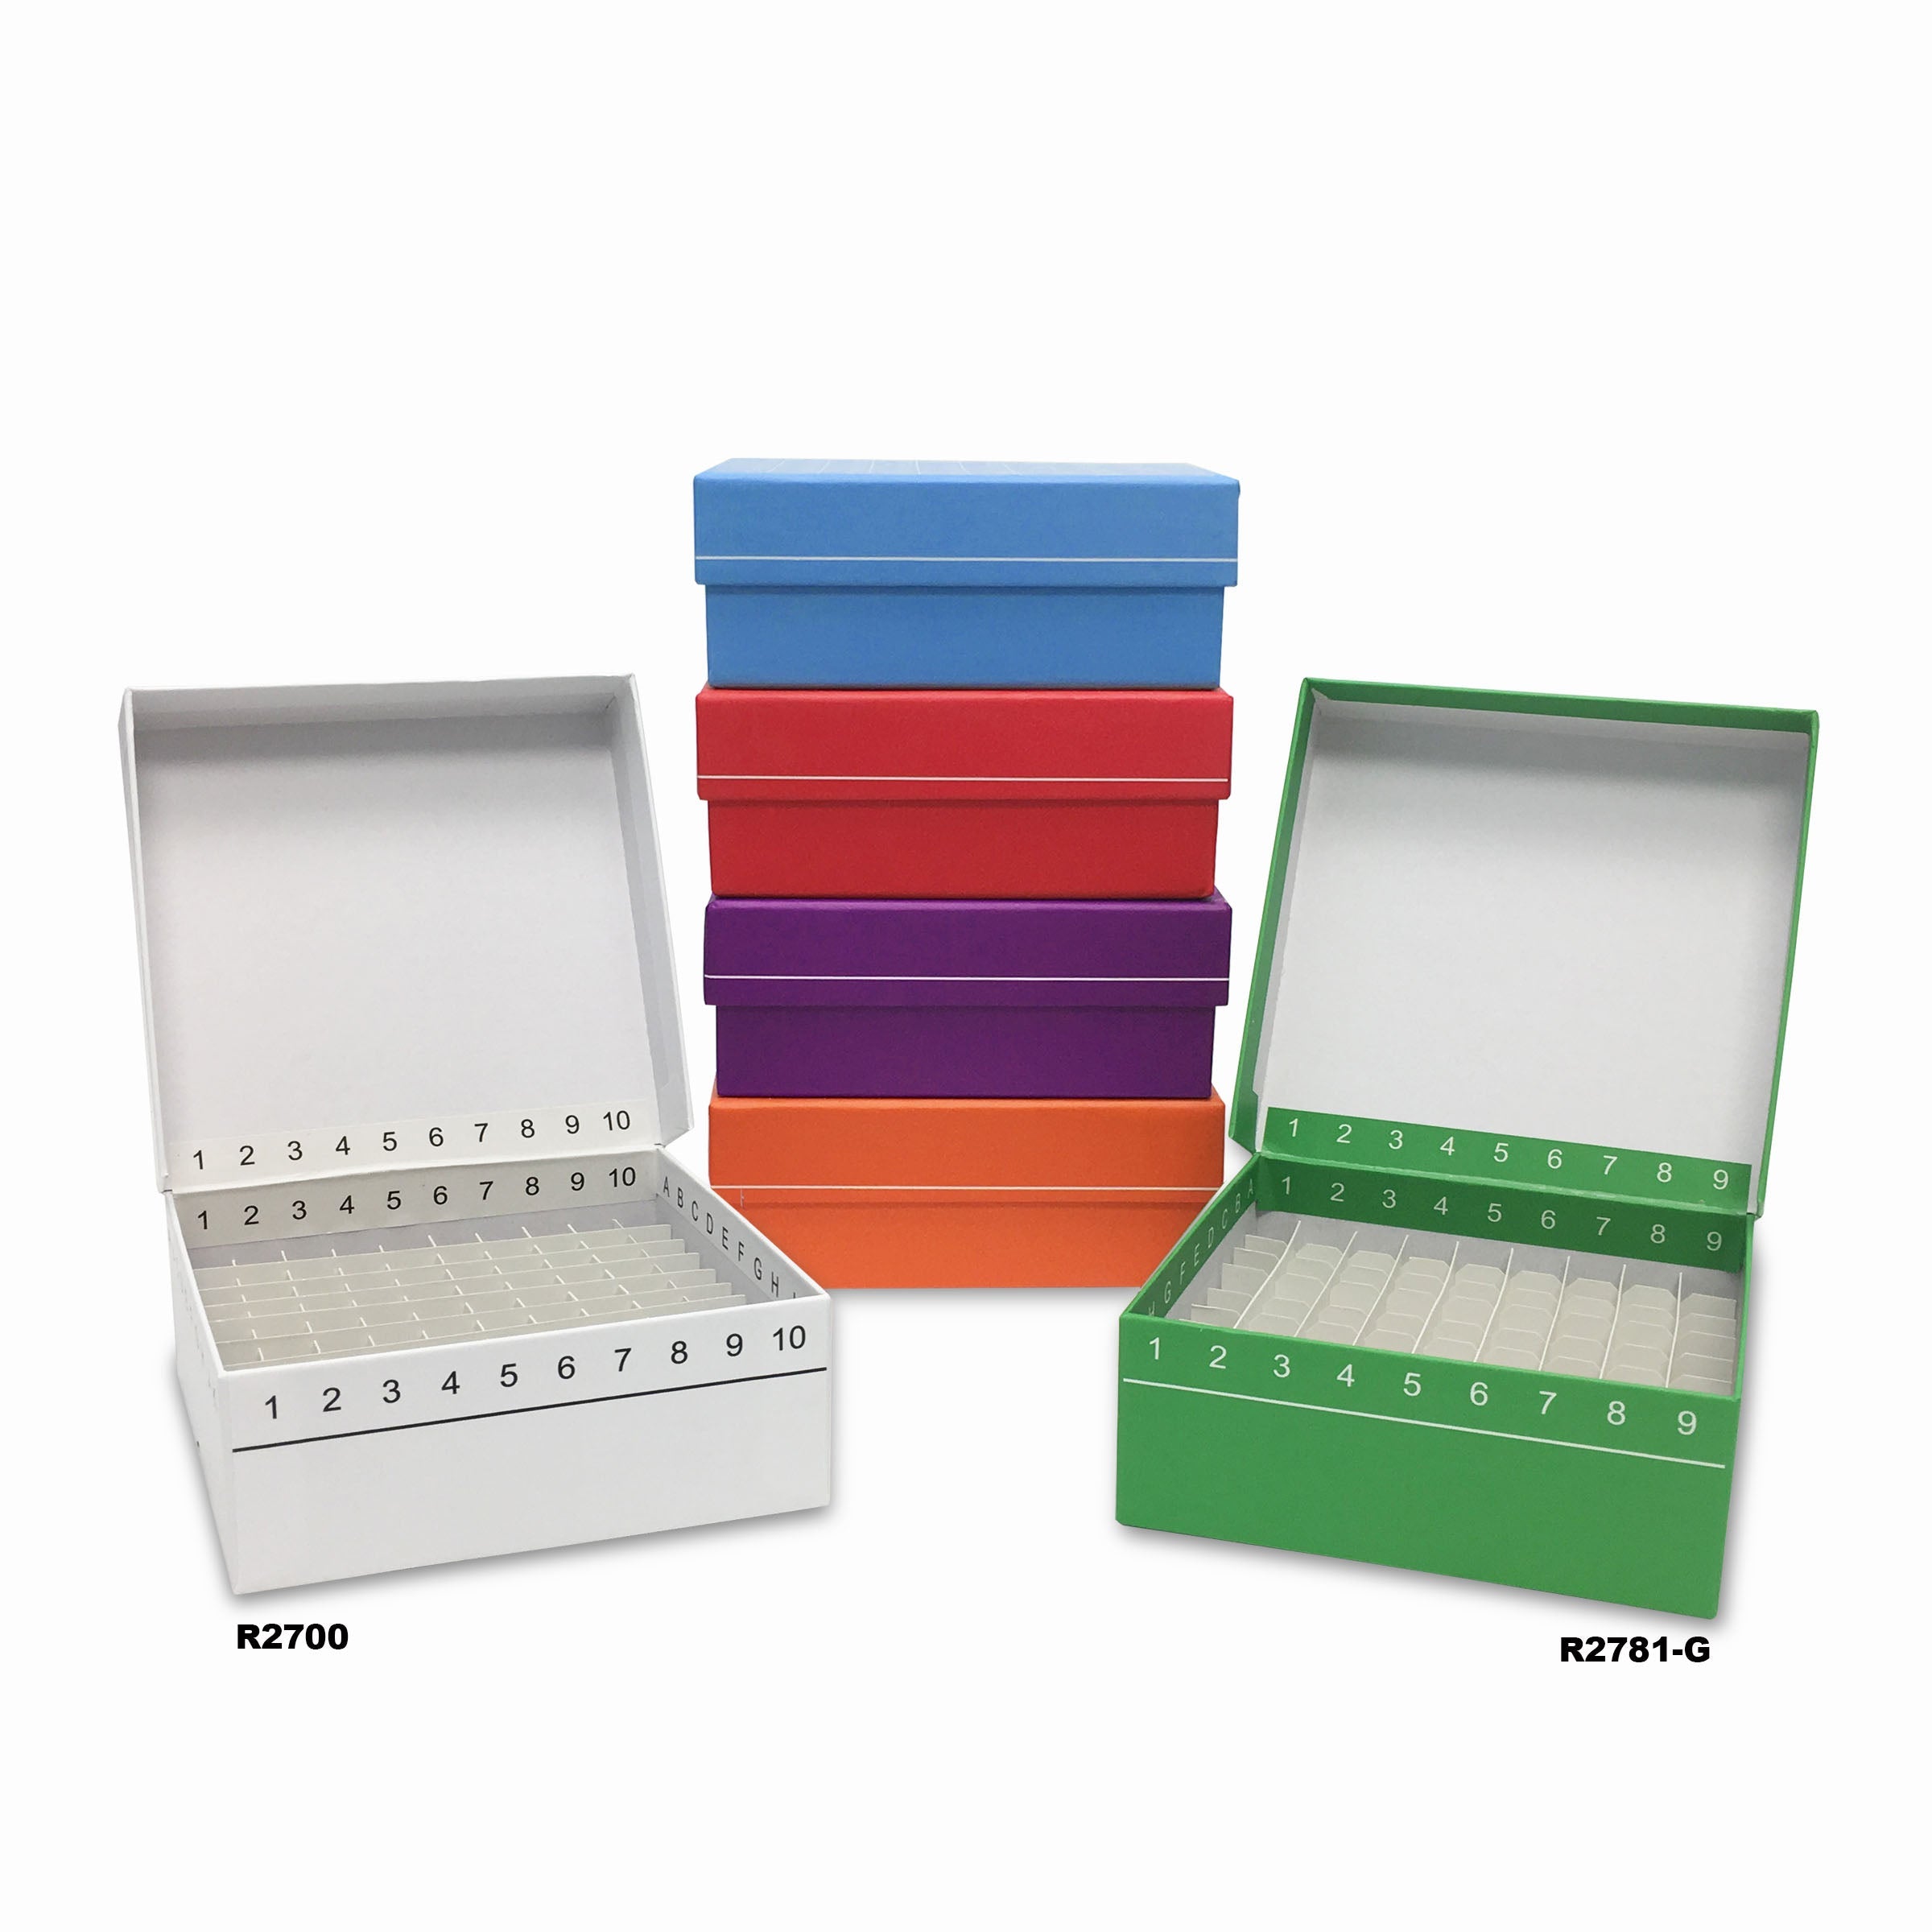 MTC Bio R2700, Fliptop Carboard Freezer Box with Attached Hinged Lid, 100-Place, White, 5/pk